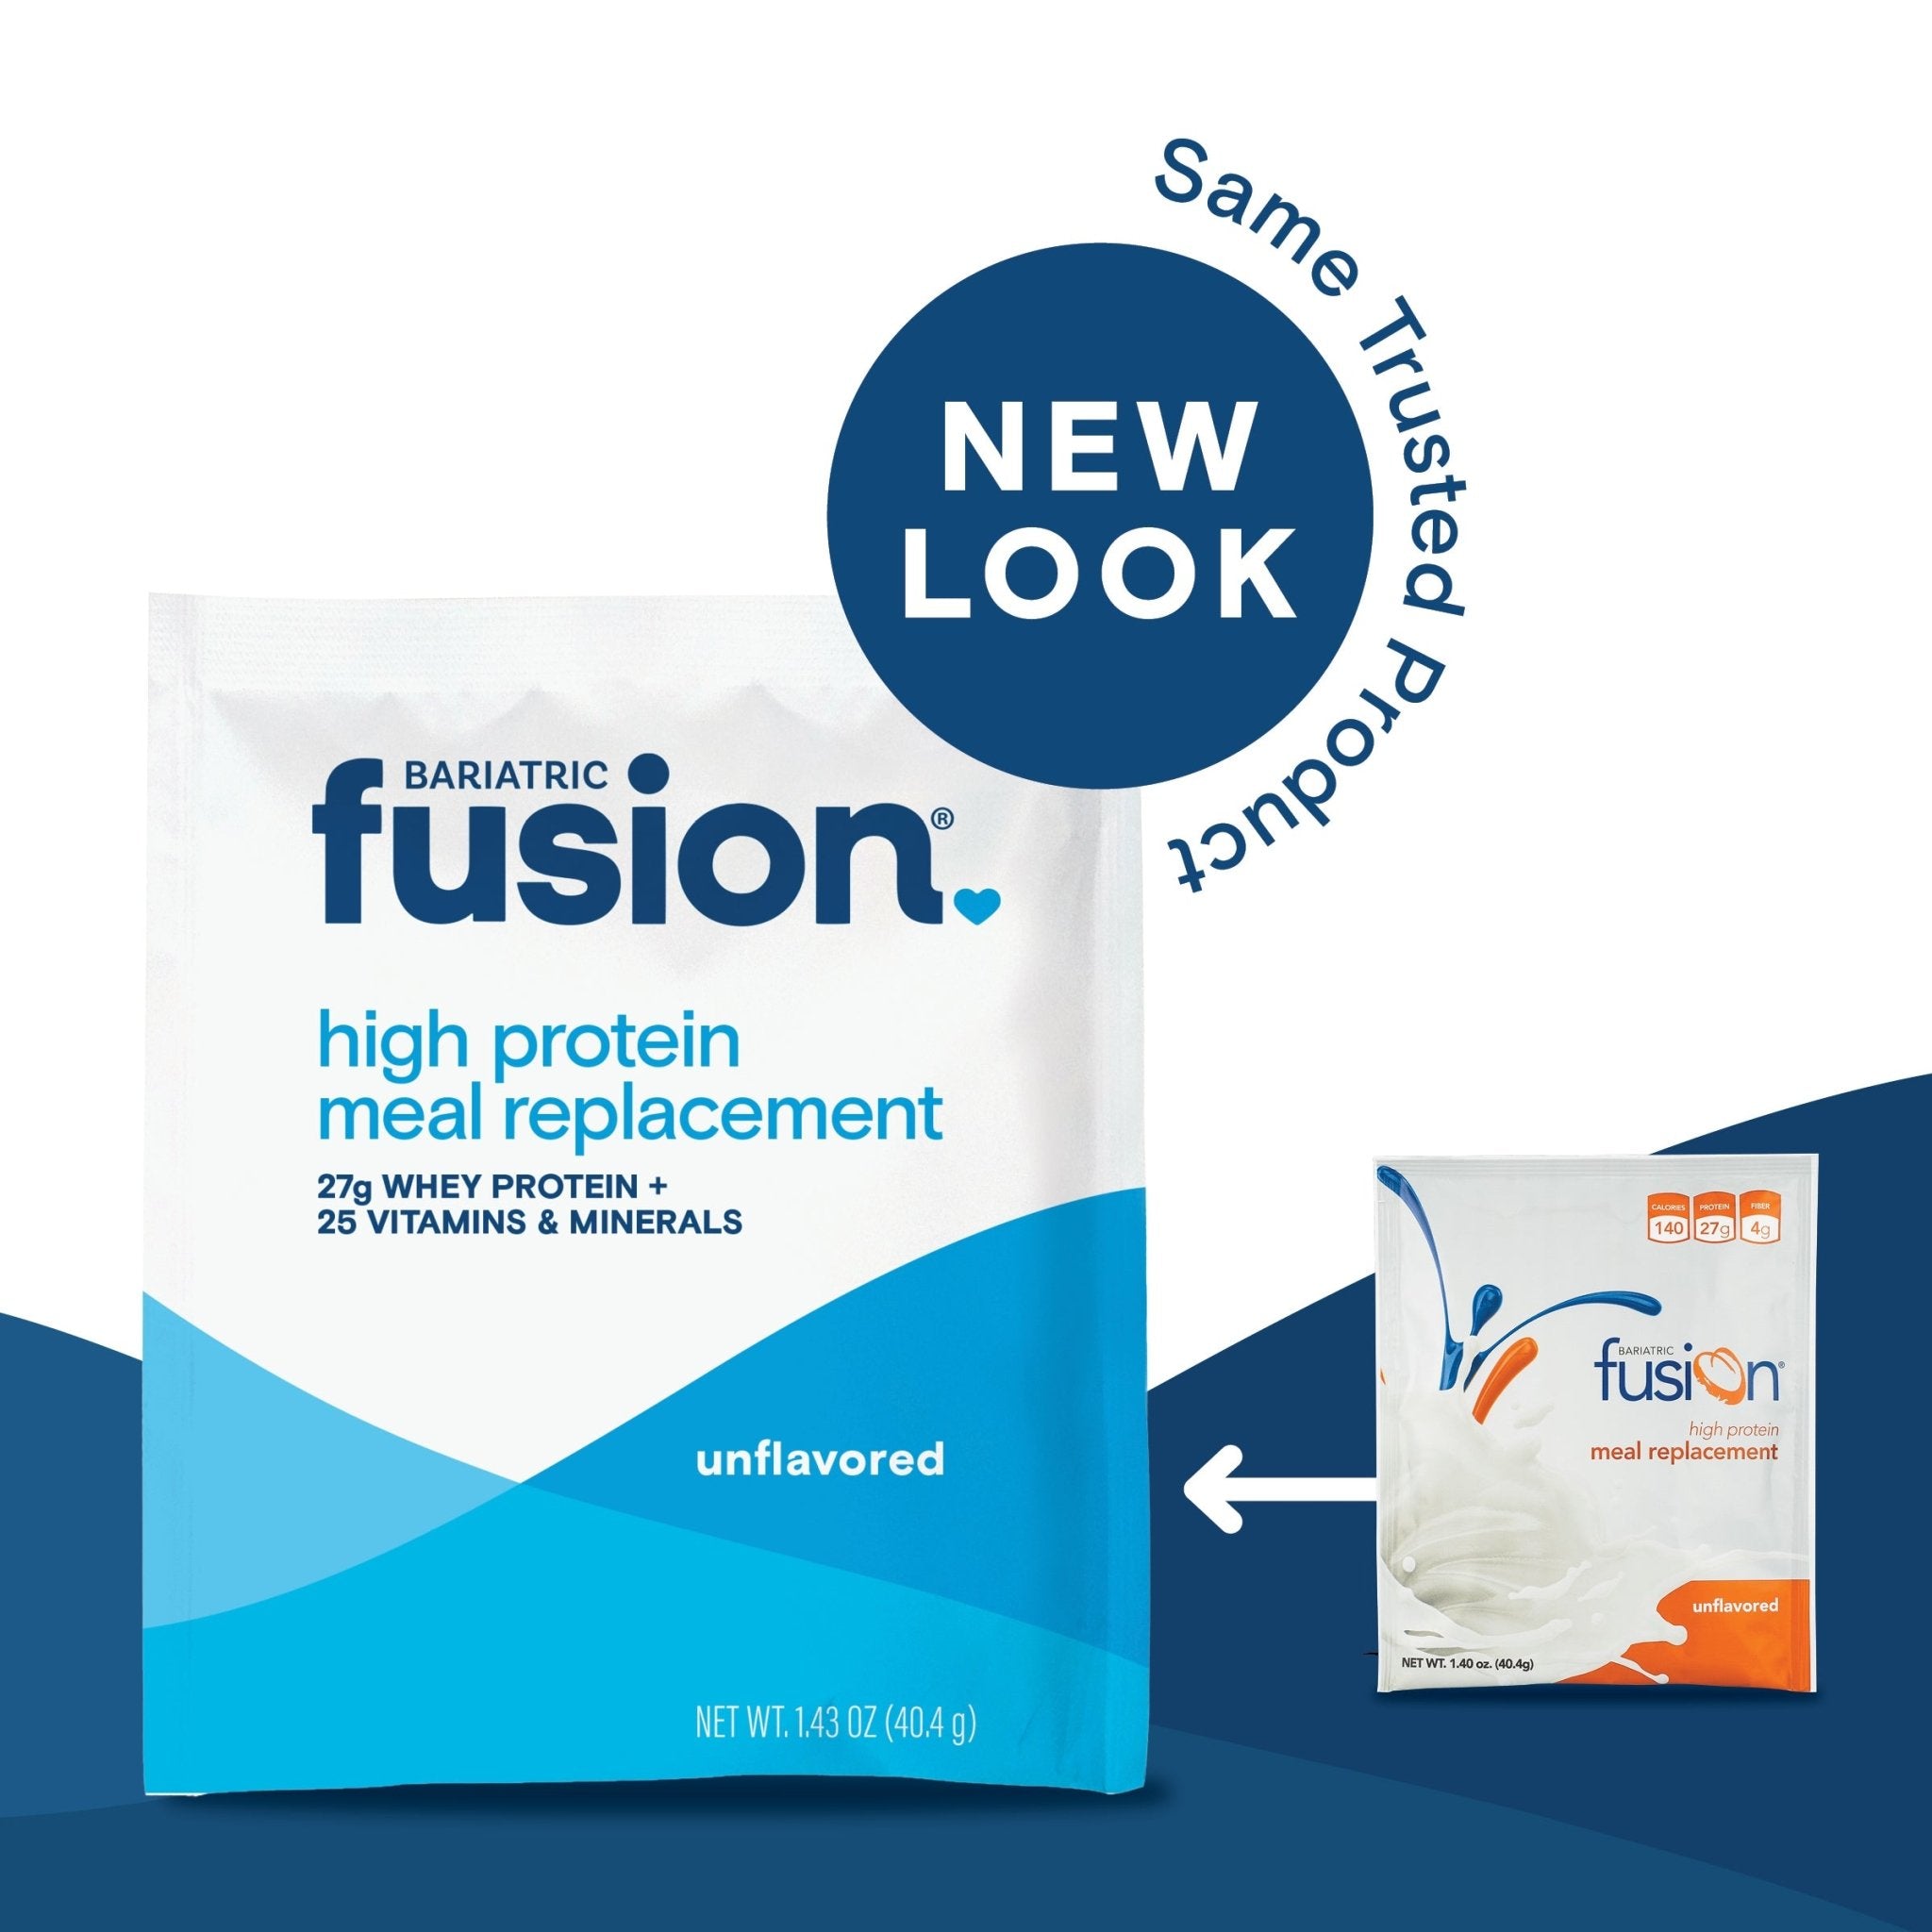 Bariatric Fusion Unflavored High Protein Meal Replacement single serving single serving new look, same trusted product.